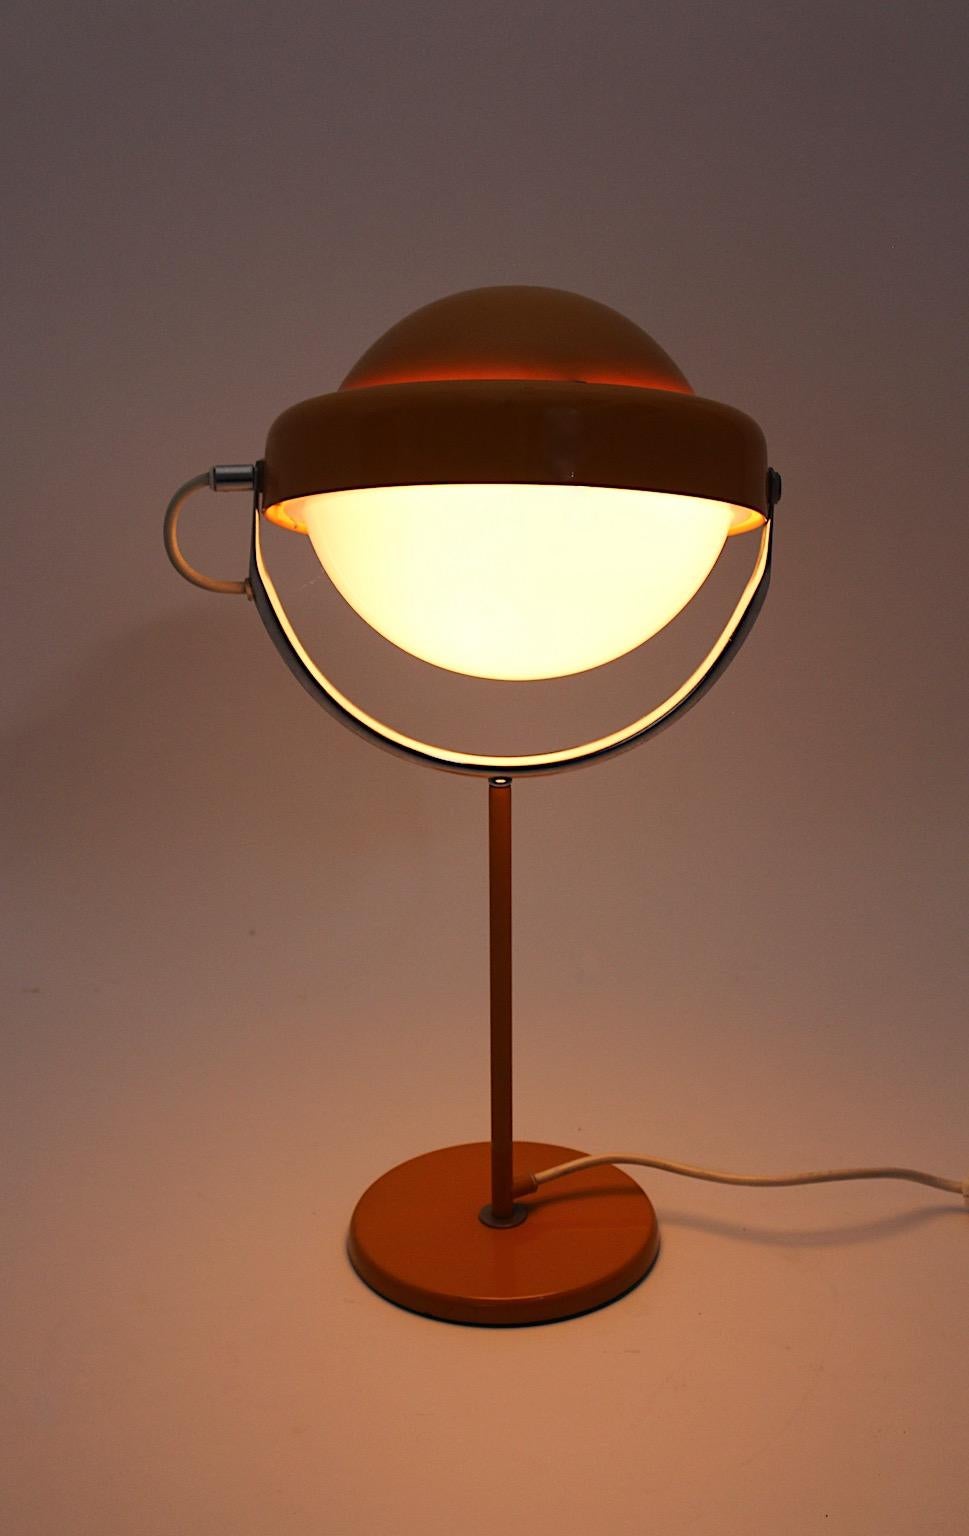 Space Age Vintage Yellow or Orange Table Lamp Uno Dahlen, 1960s, Sweden For Sale 2